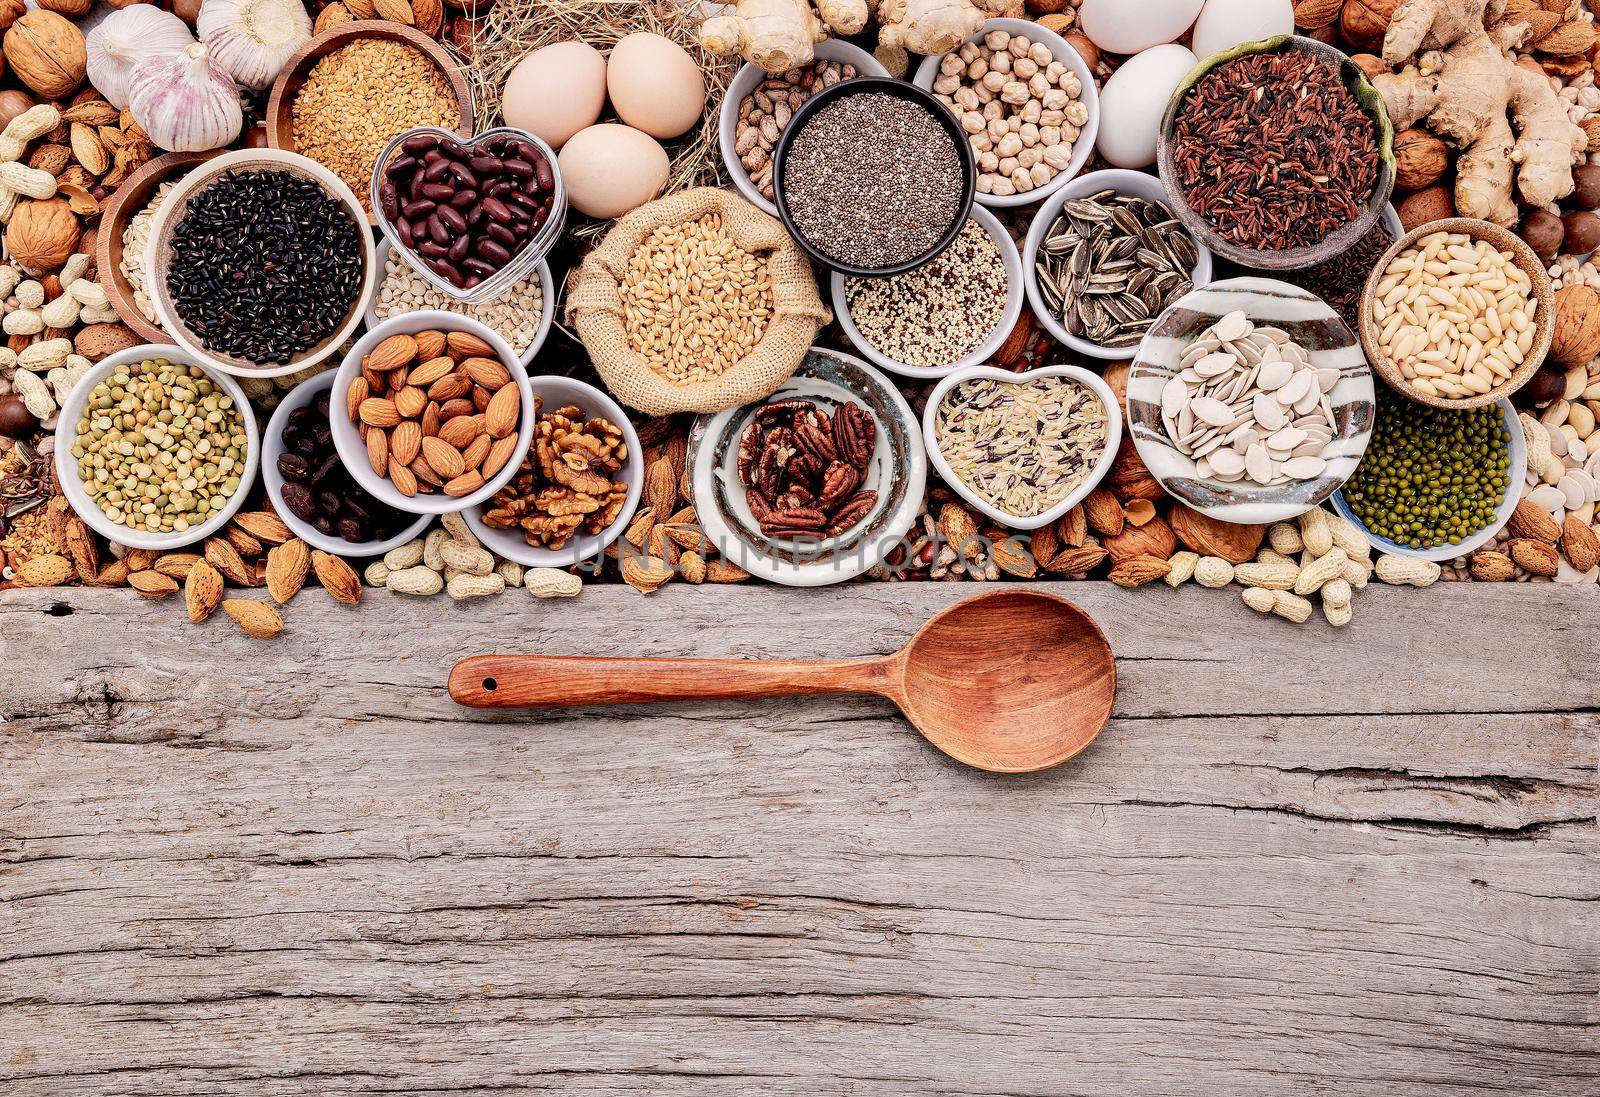 Ingredients for the healthy foods selection in ceramic bowl. The concept of superfoods set up on white shabby wooden background with copy space.